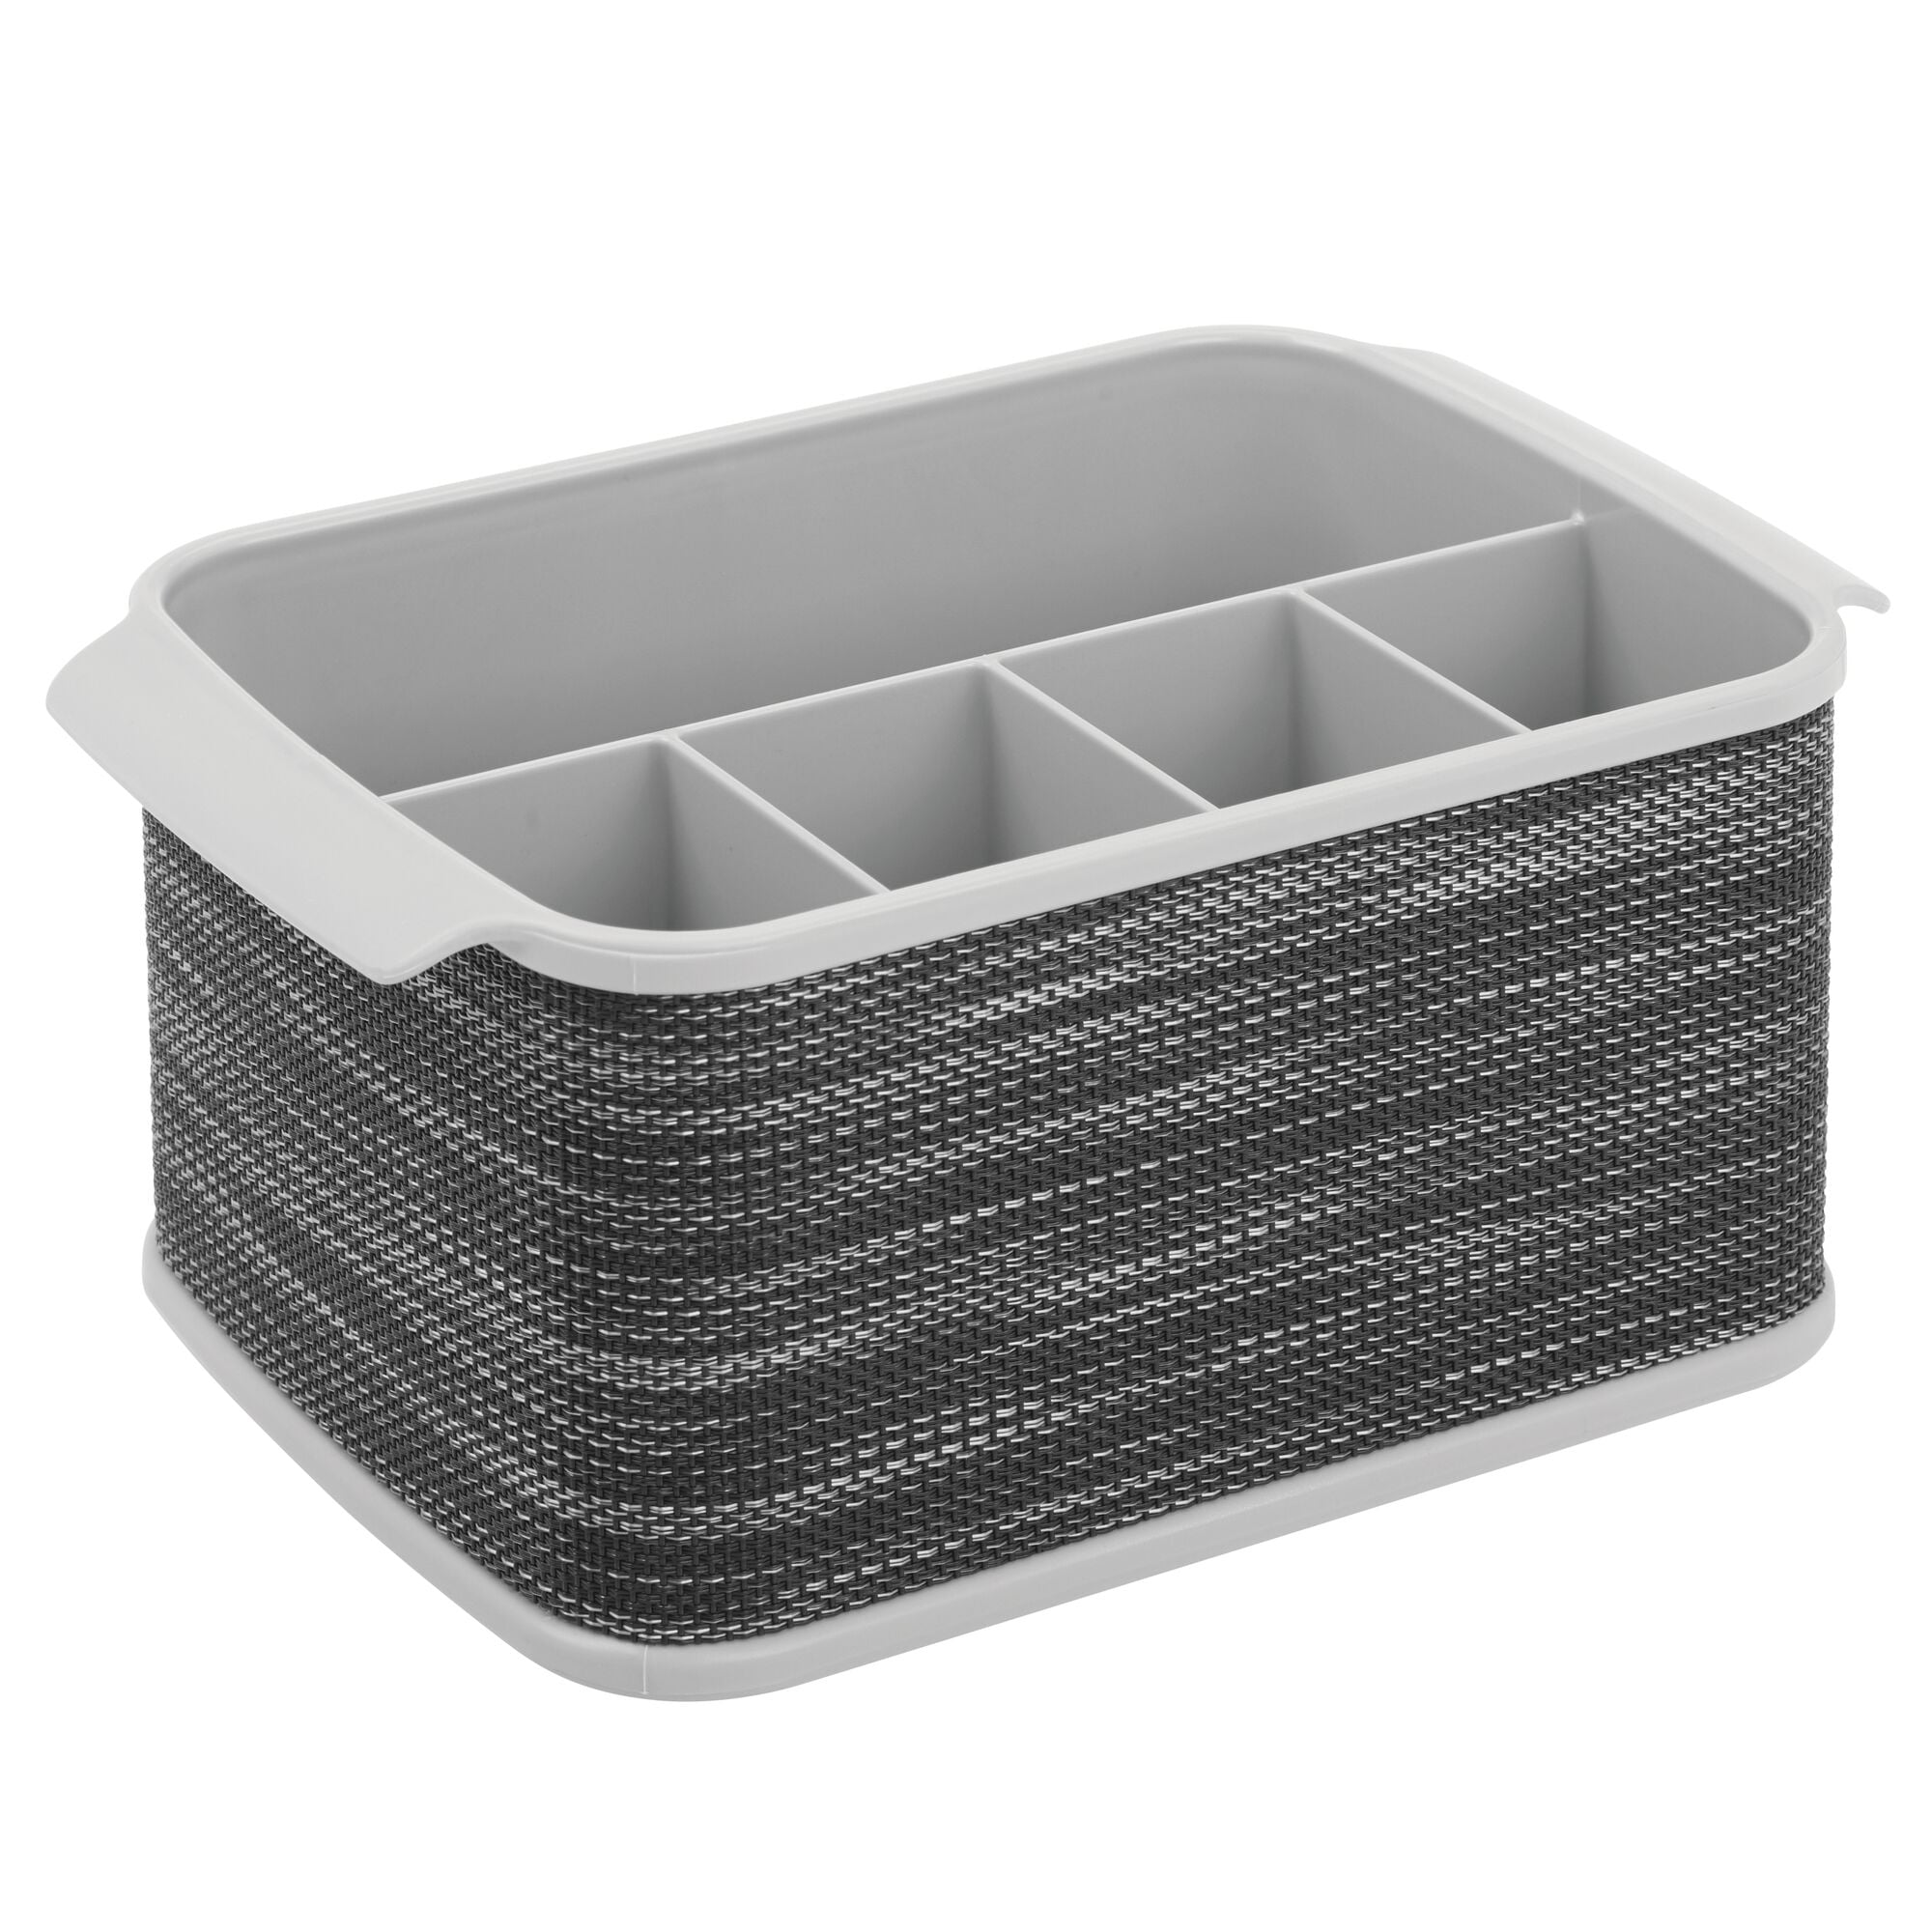 Light Gray Basket Organizer for Forks mDesign Plastic Cutlery Storage Organizer Caddy Bin Spoons Indoor or Outdoor Use Napkins Kitchen Cabinet or Pantry Knives Tote with Handle 